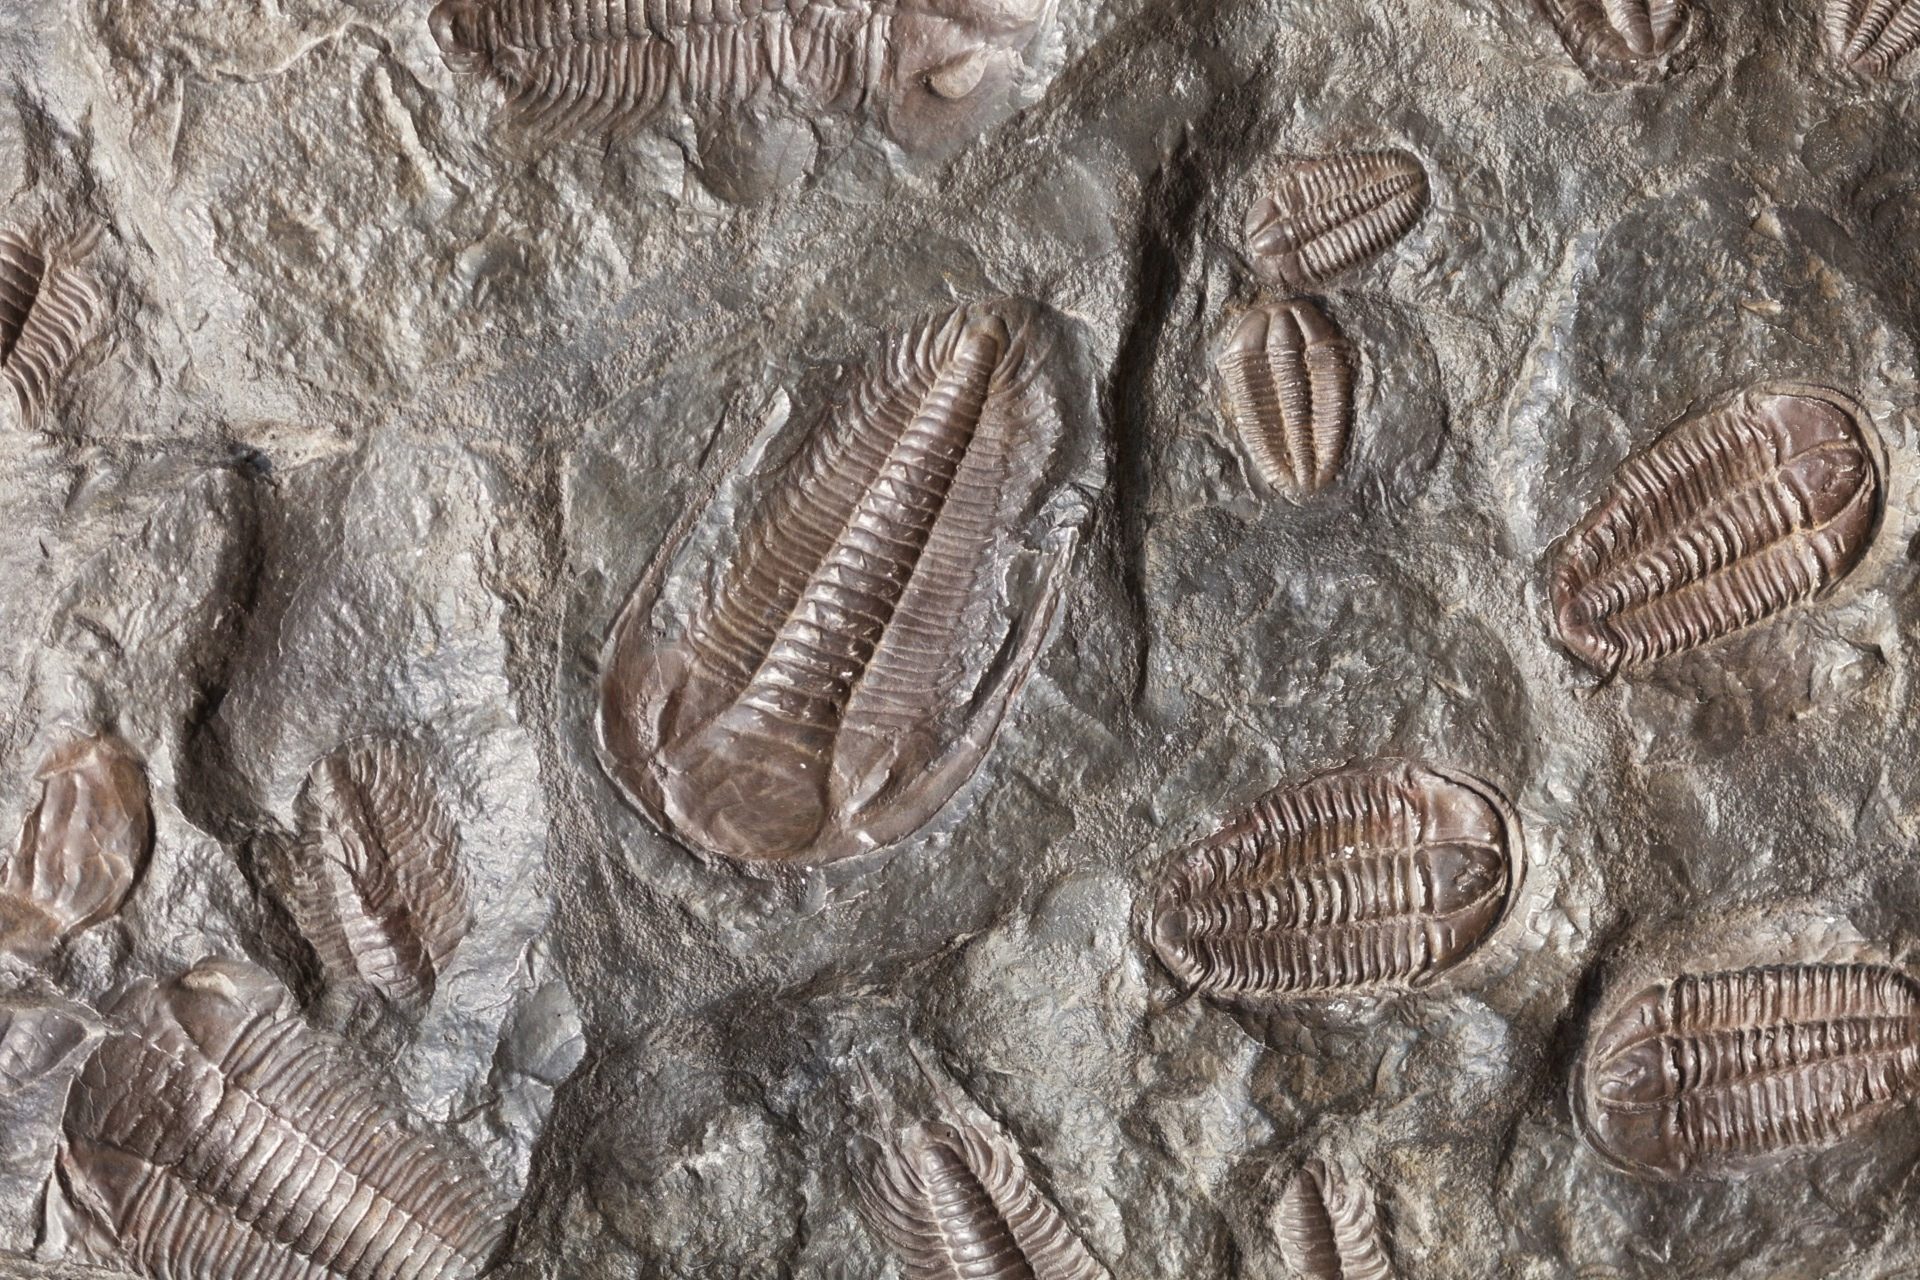 Signs of biology preserved over hundreds of millions of years